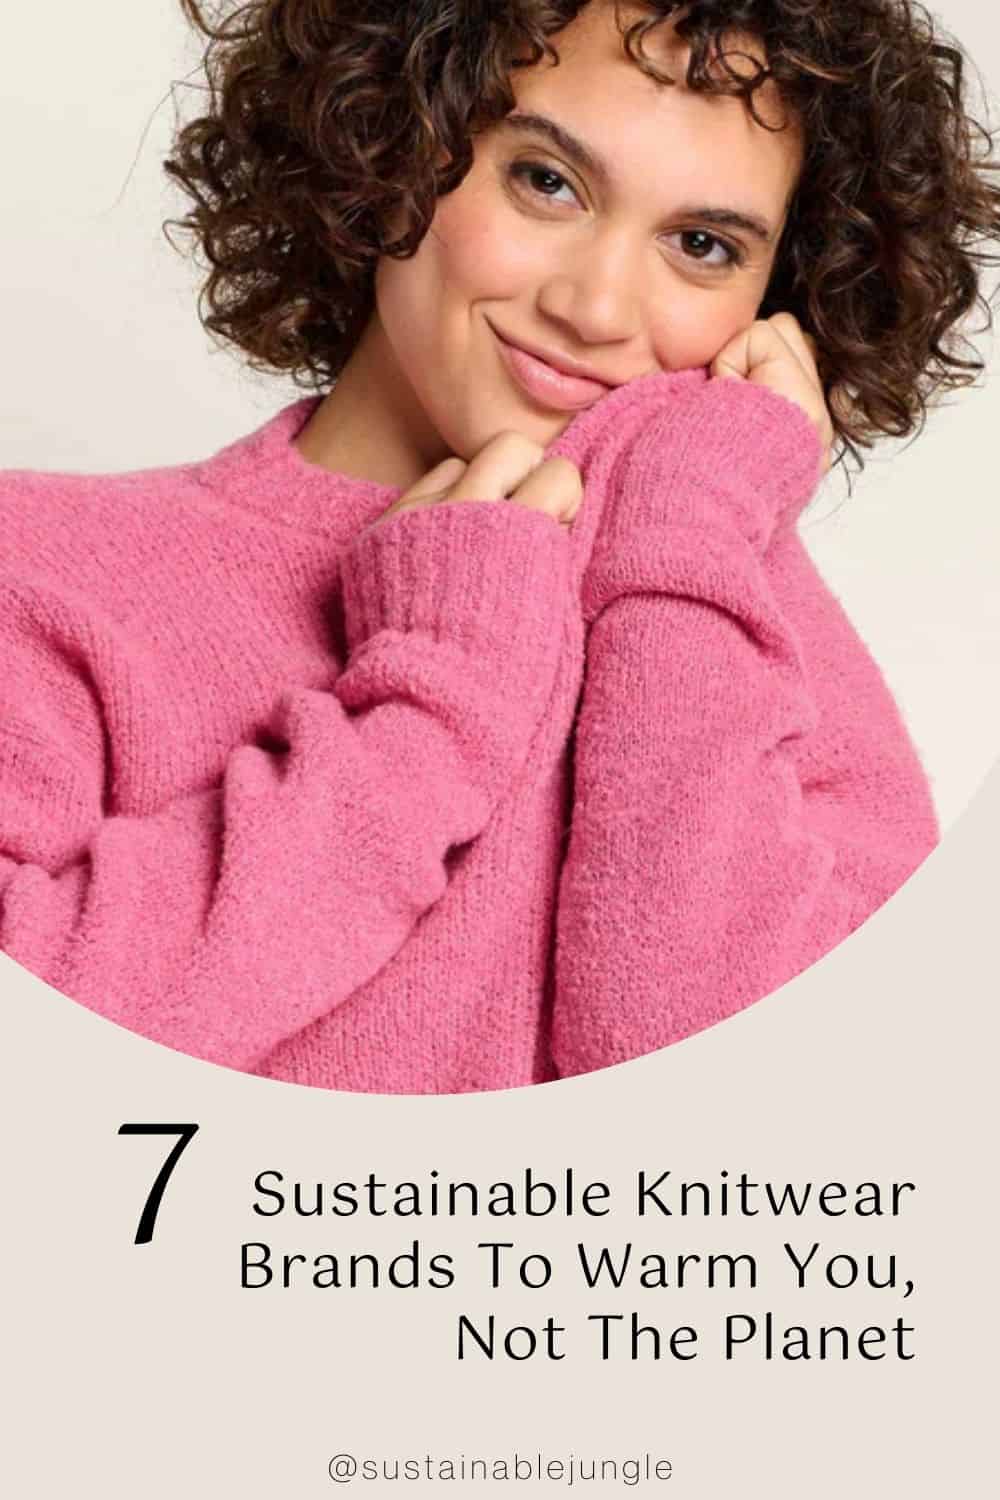 7 Sustainable Knitwear Brands To Warm You, Not The Planet Image by Toad&Co #sustainableknitwear #sustainablemensknitewear #sustainableknitwearbrands #ethicalknitwear #ethicalknitwearbrands #sustainablewomensknitwear #sustainablejungle